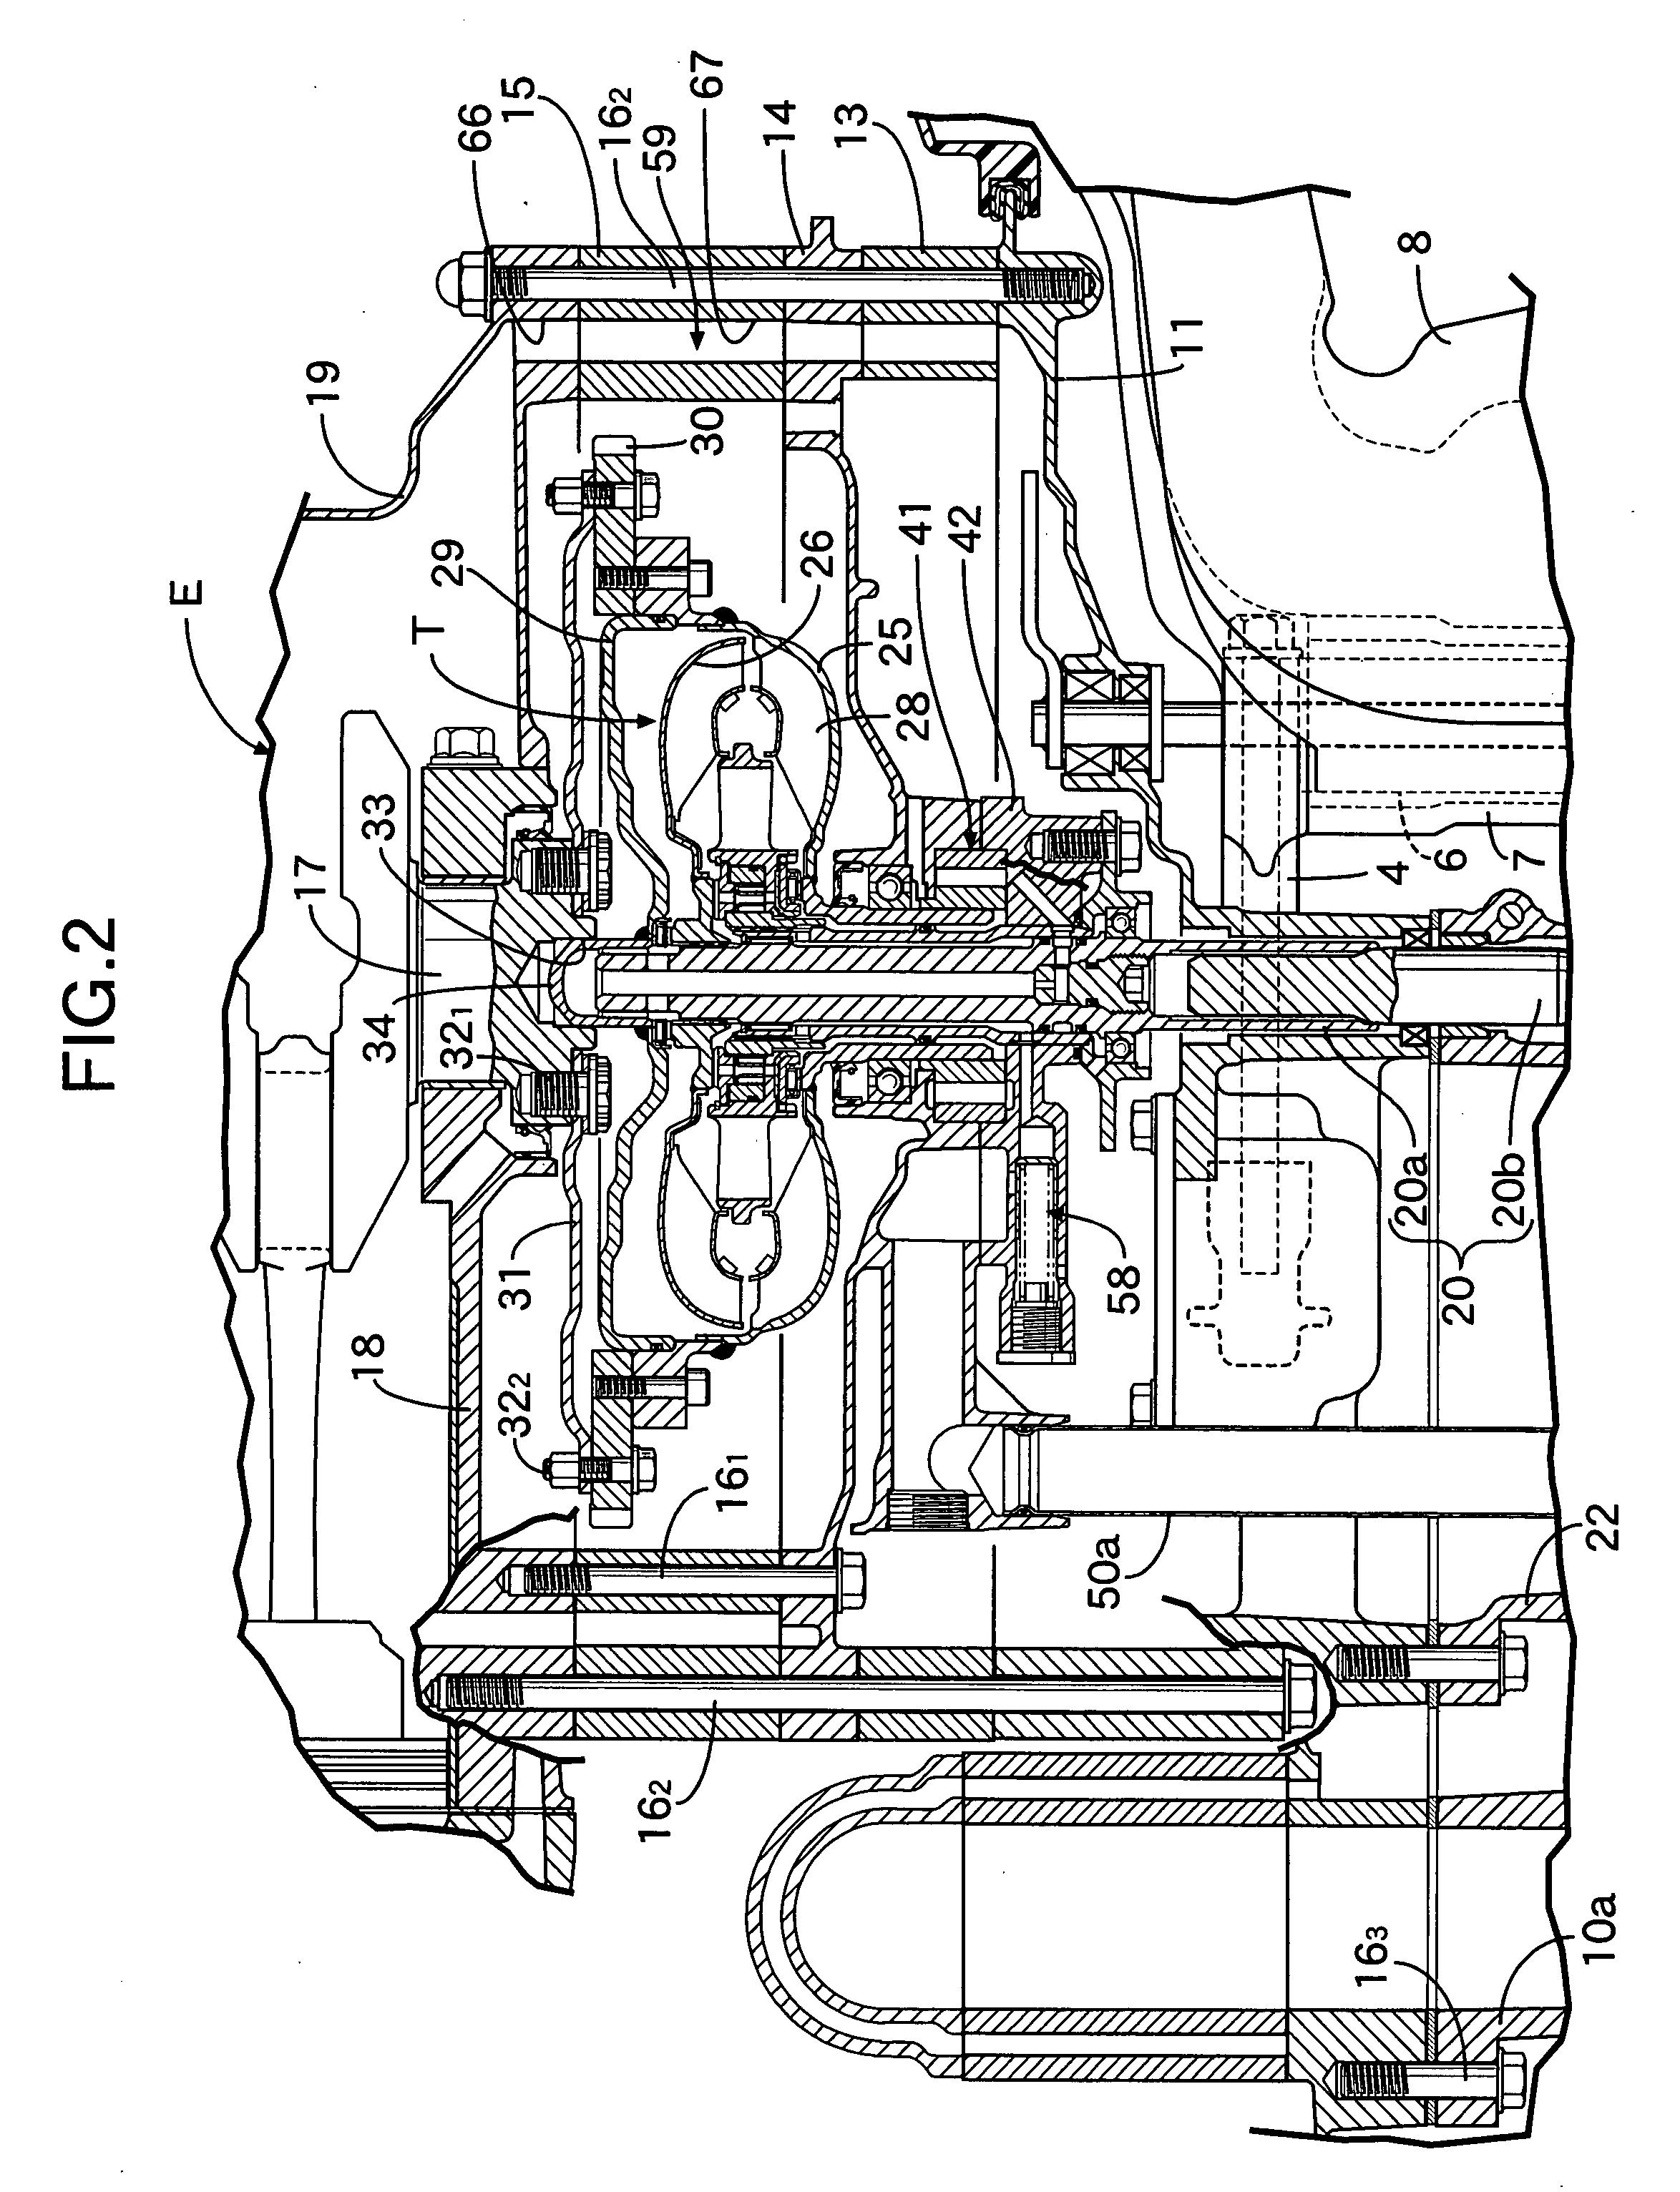 Vertical fluid power transmission and outboard engine system